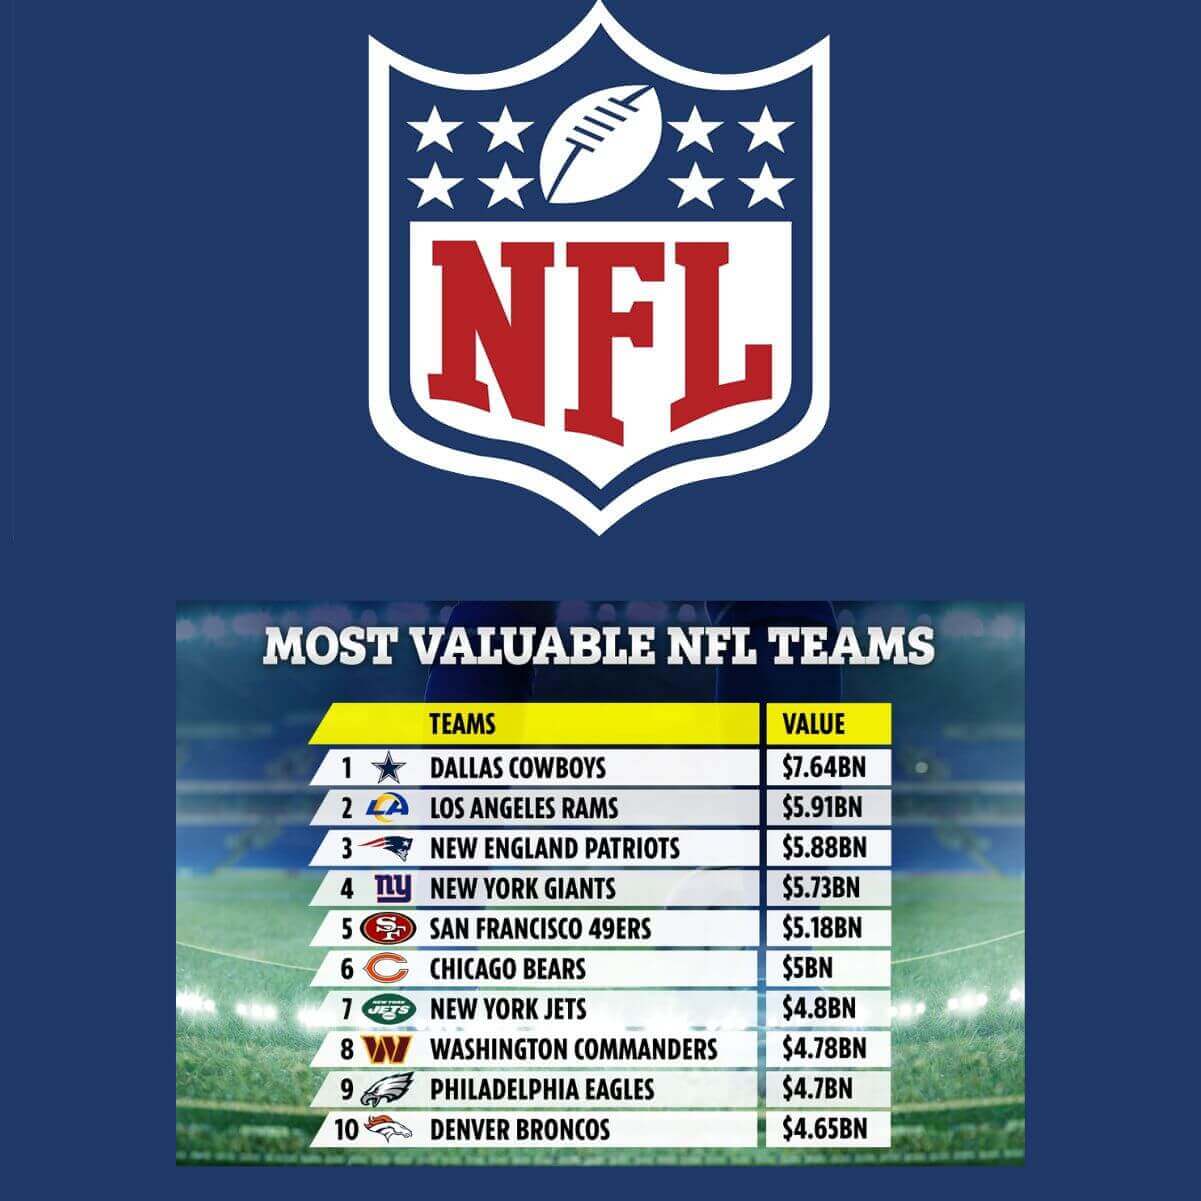 Most Expensive NFL Teams The Most Valuable NFL Teams (2023)